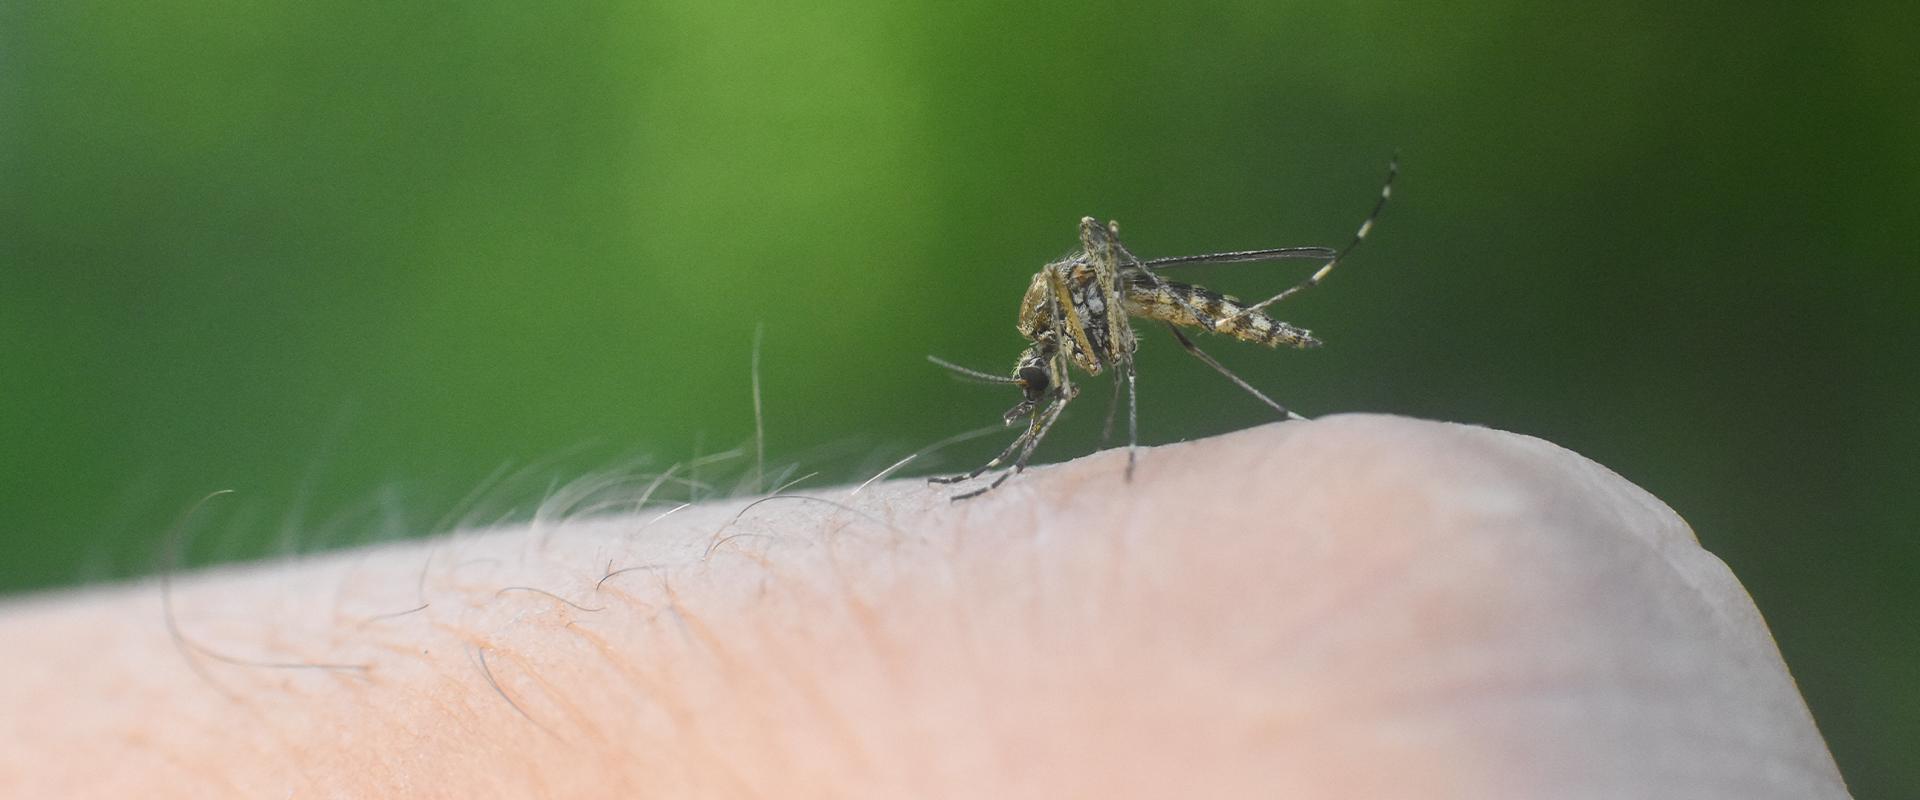 mosquito on a finger